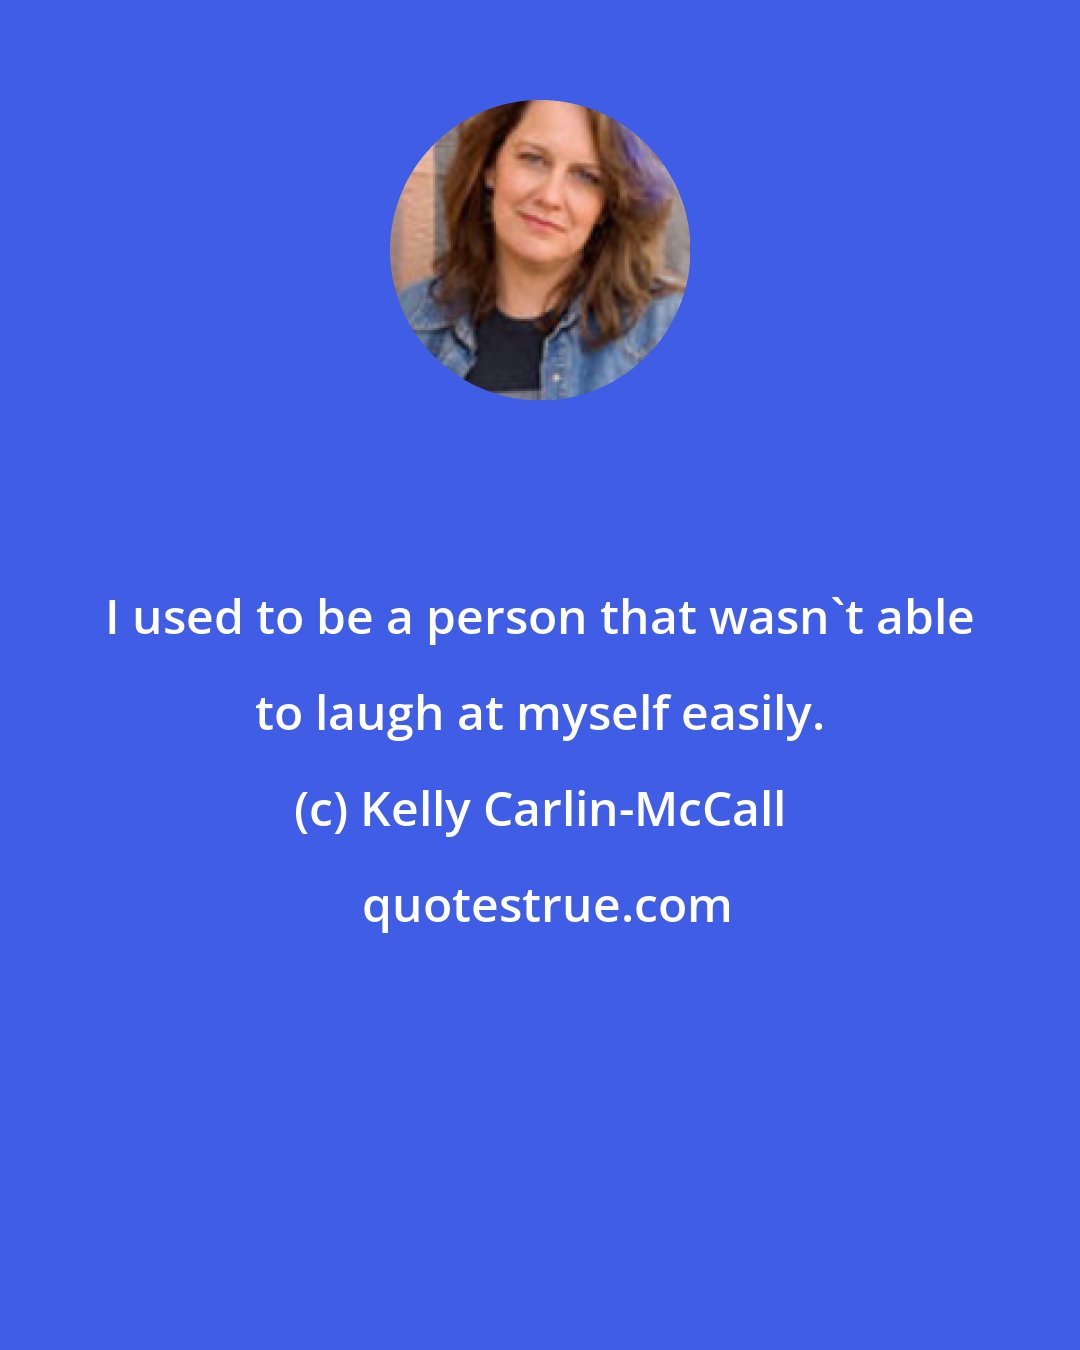 Kelly Carlin-McCall: I used to be a person that wasn't able to laugh at myself easily.